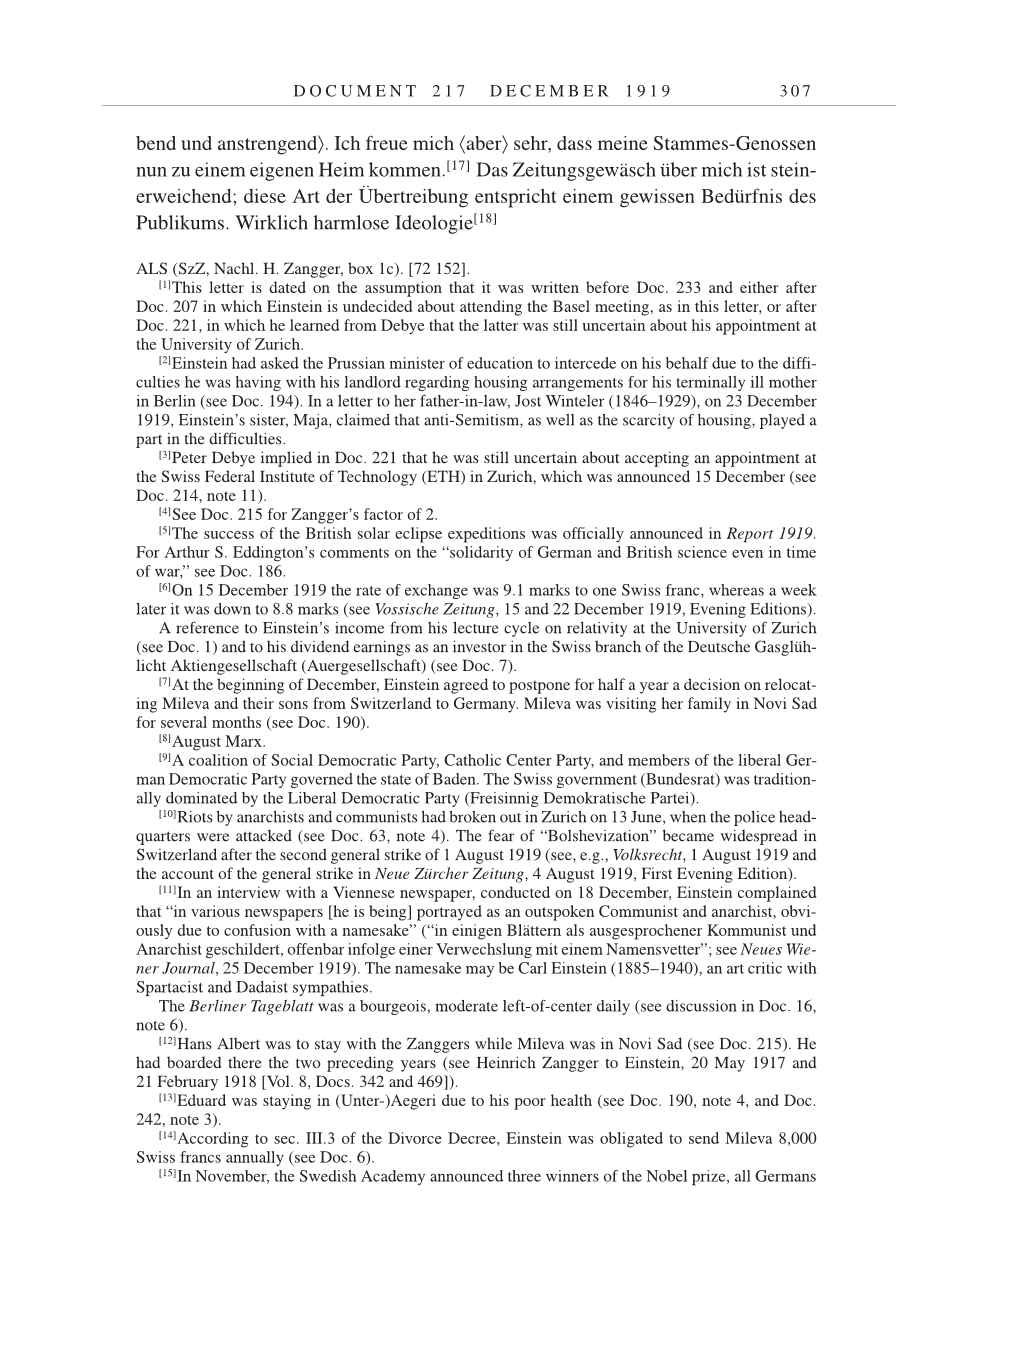 Volume 9: The Berlin Years: Correspondence January 1919-April 1920 page 307